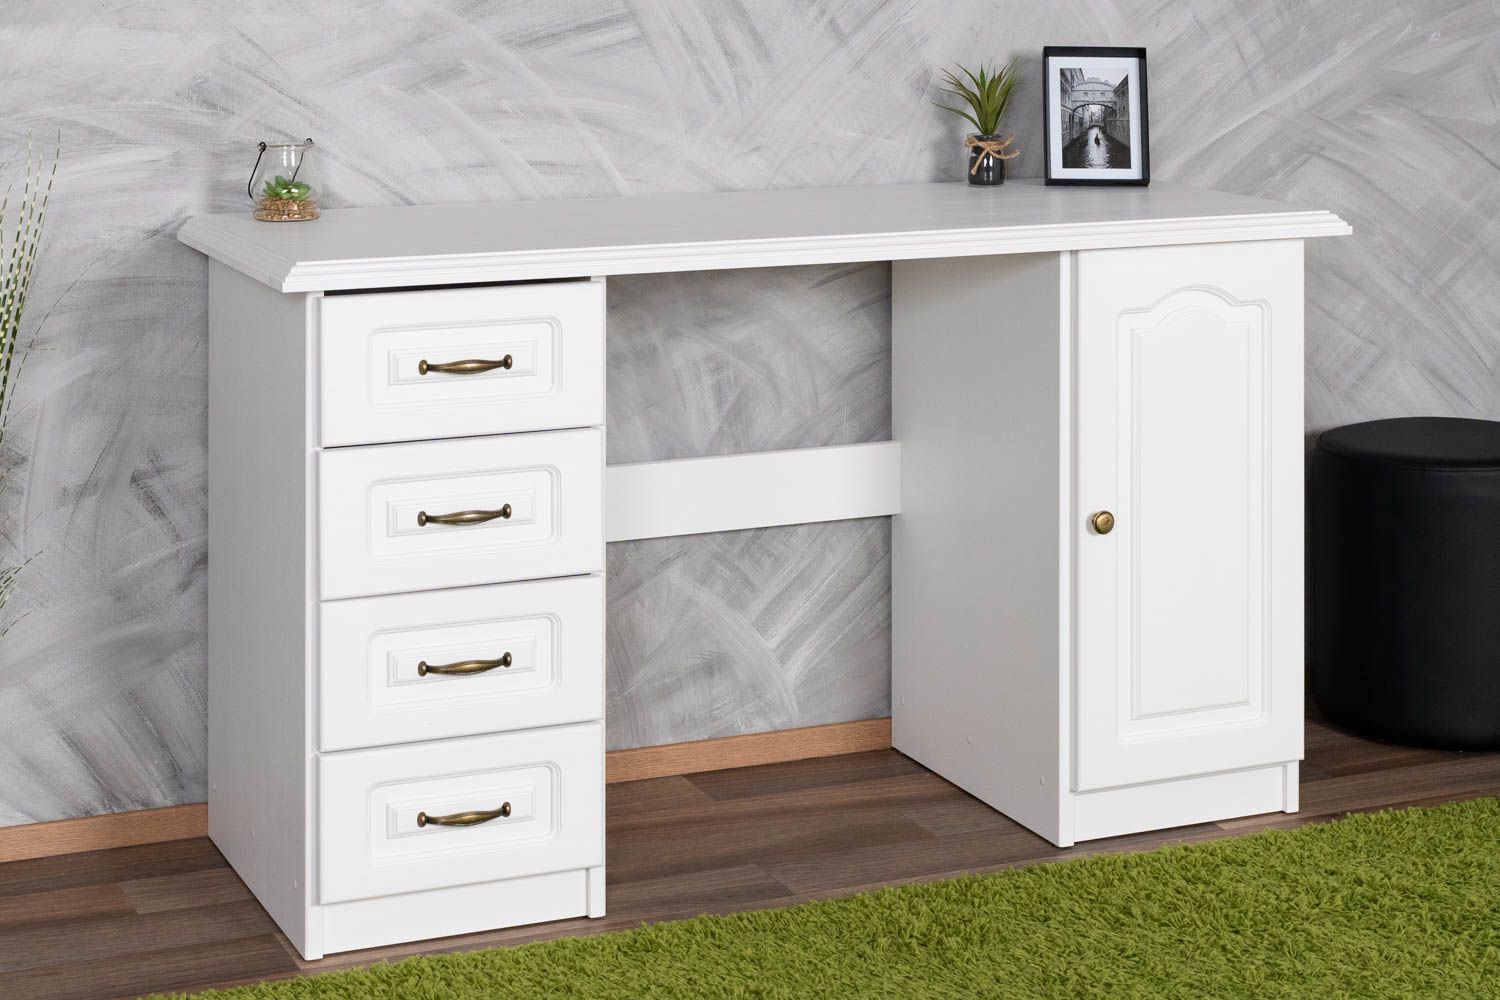 Desk solid pine solid wood white lacquered Pipilo 18 - Dimensions: 75 x 139 x 54 cm (H x W x D)